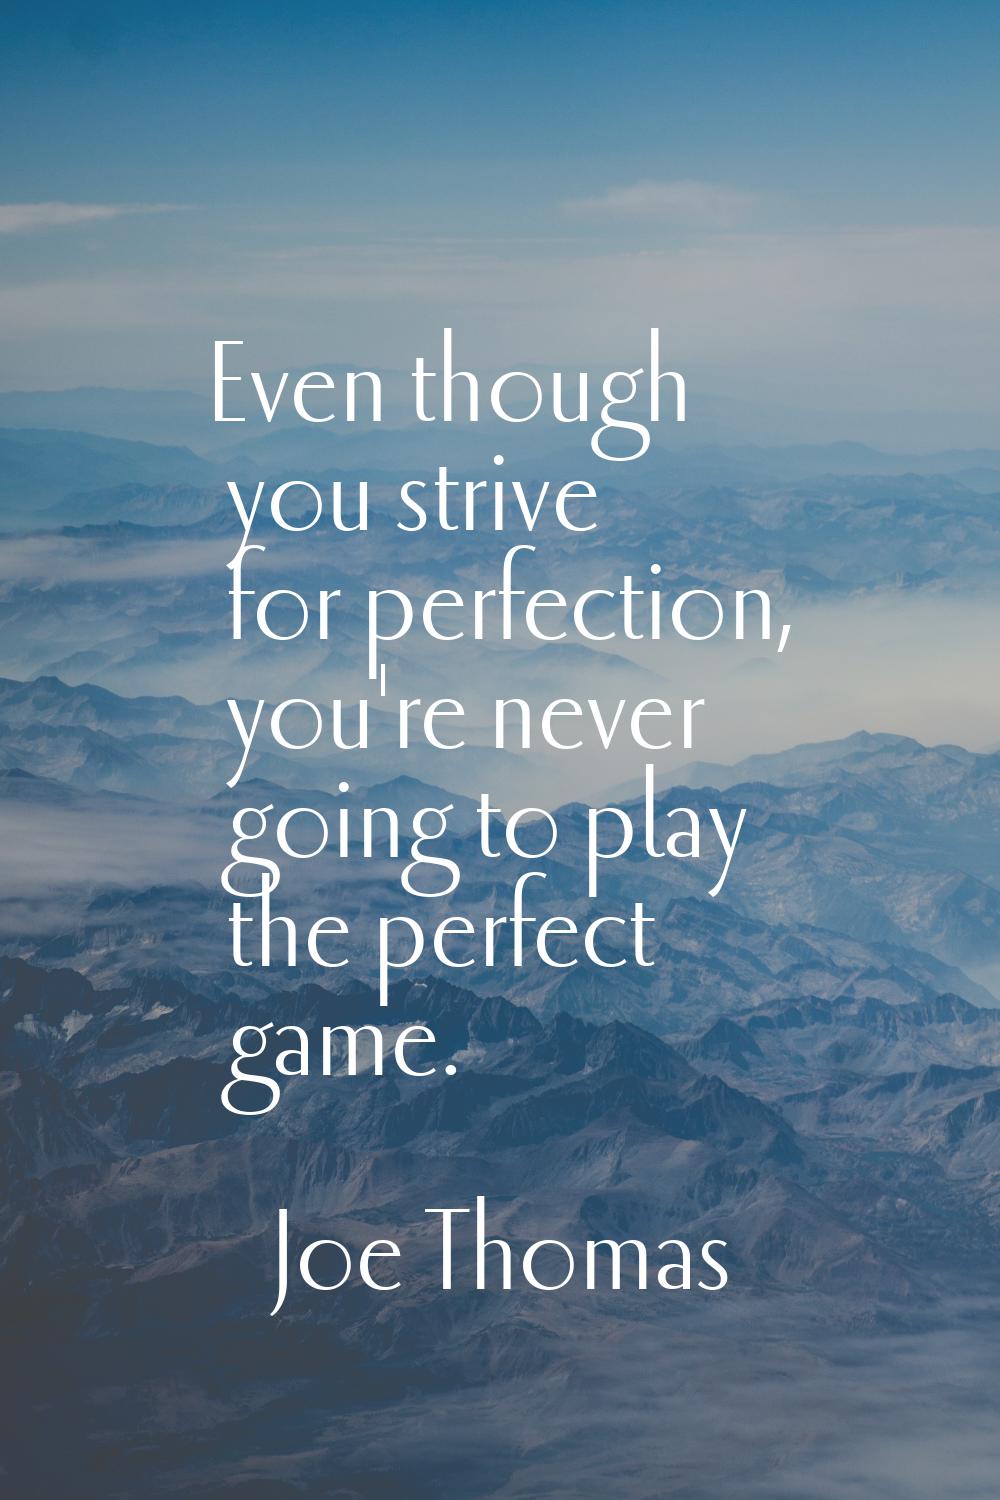 Even though you strive for perfection, you're never going to play the perfect game.